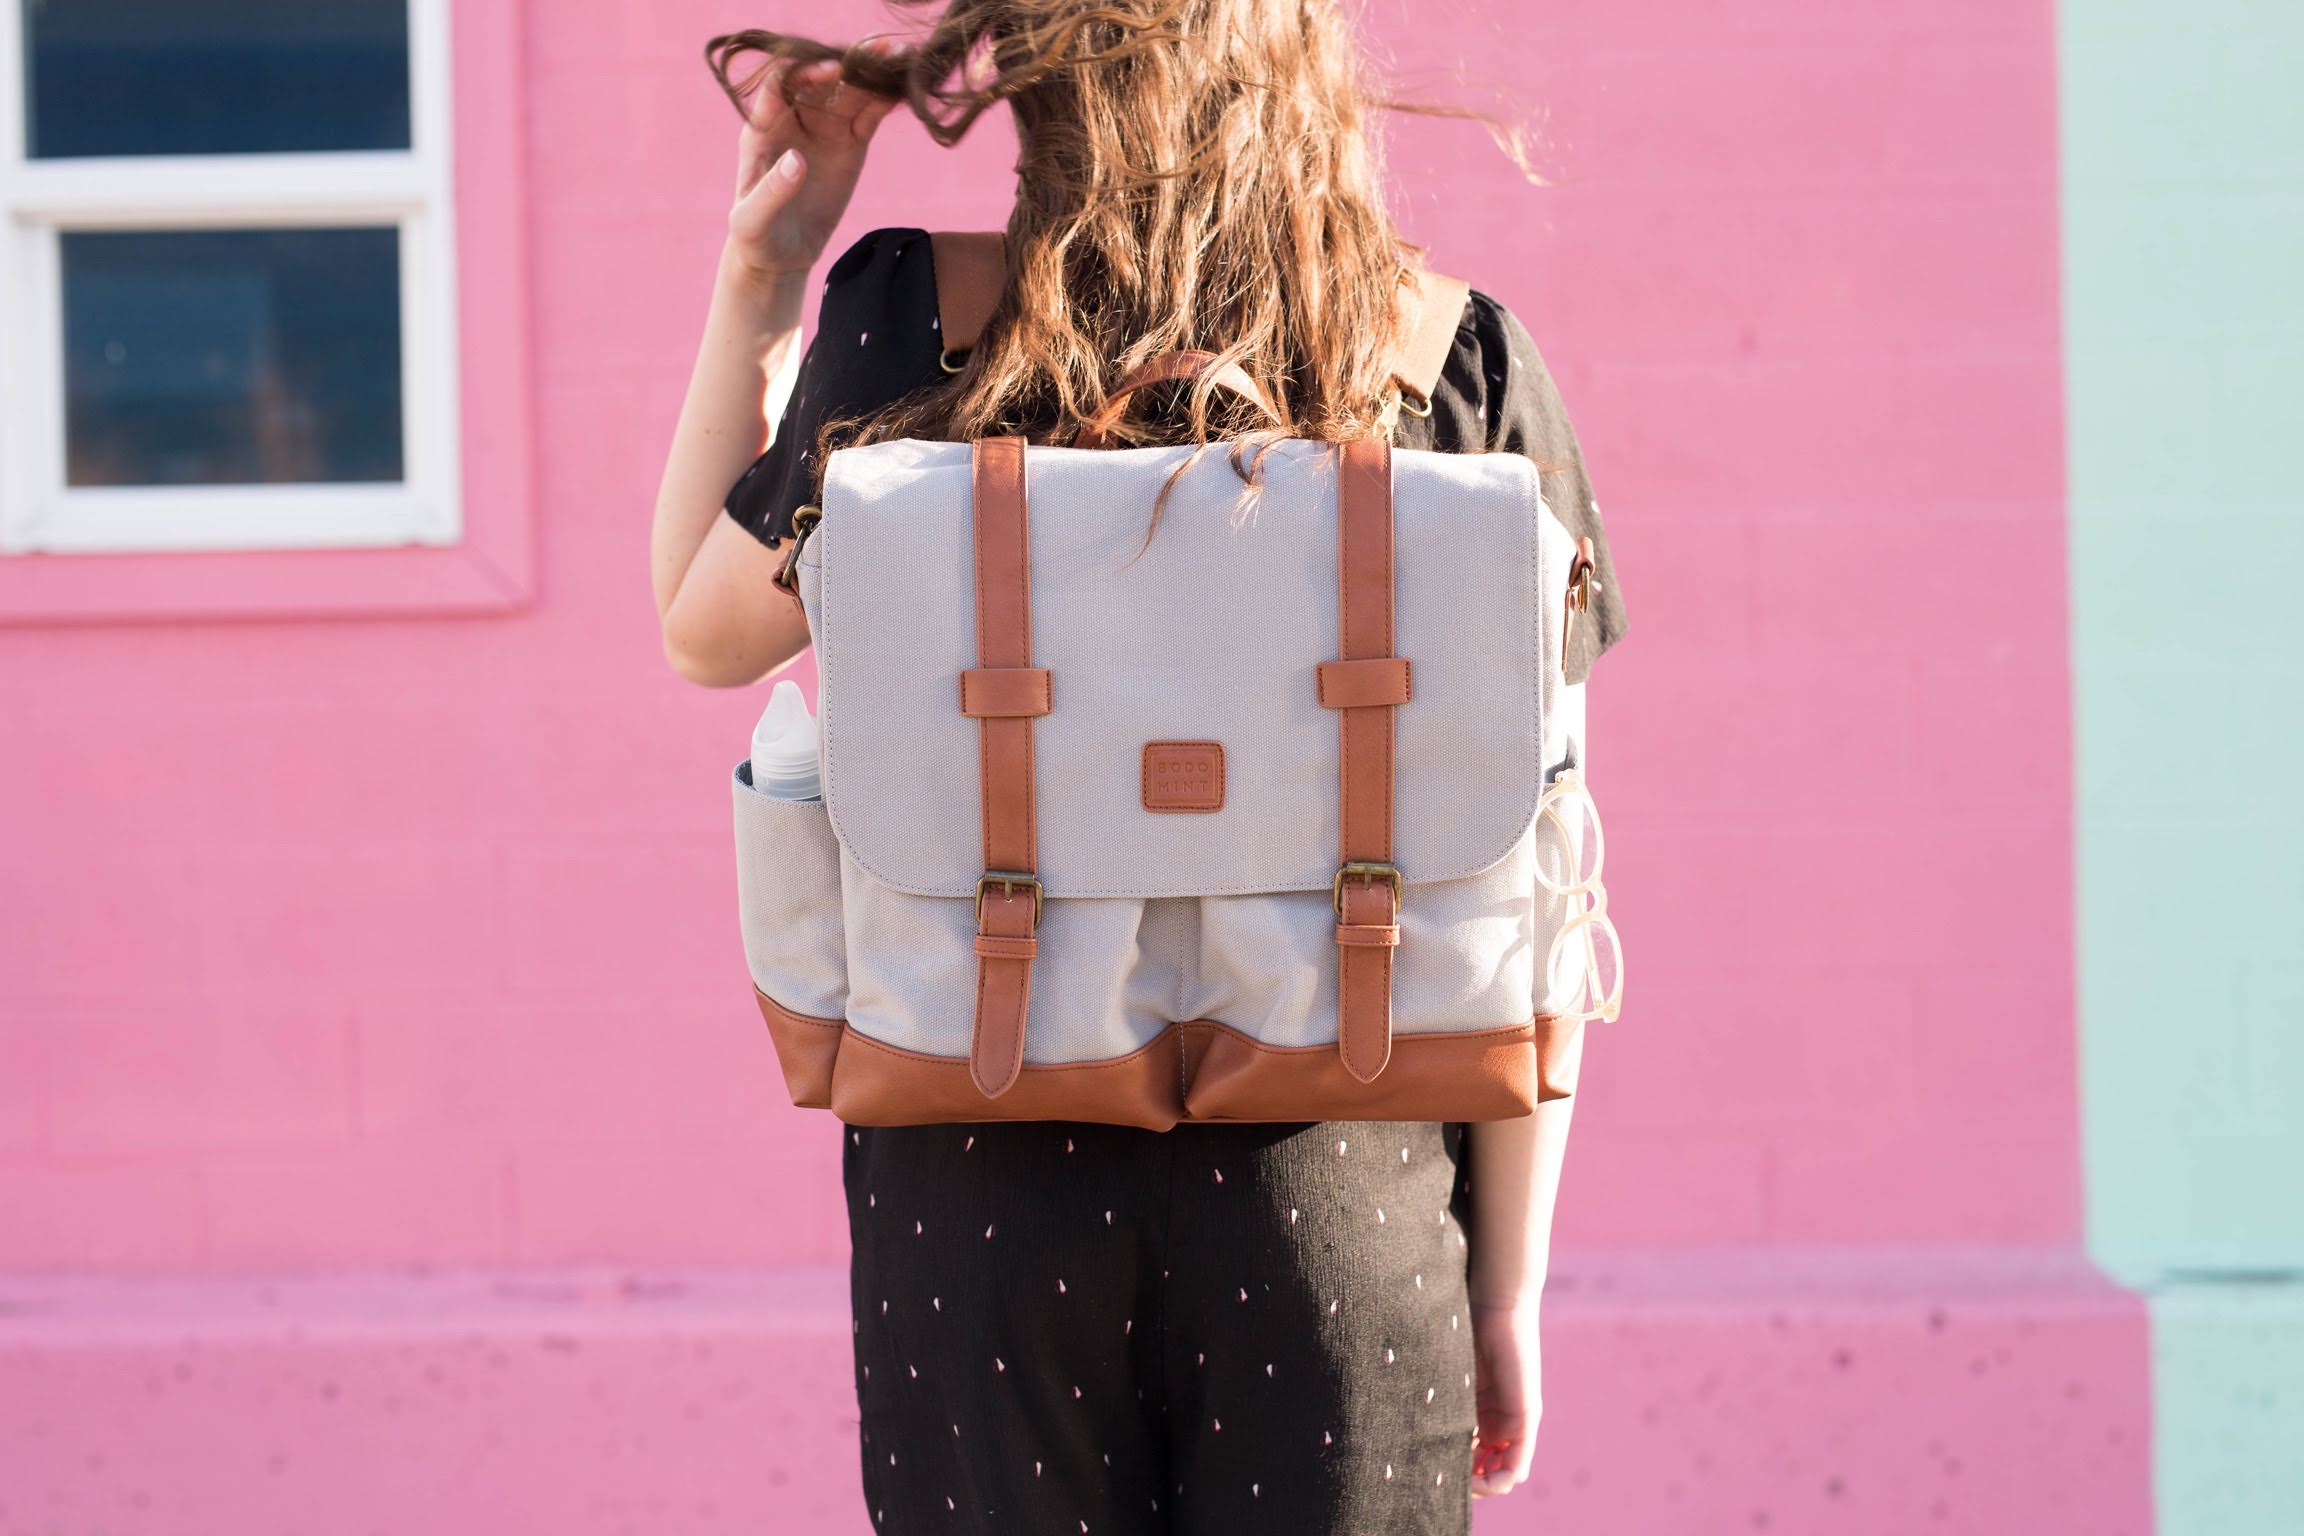 New Diaper Bags That Are Big on Style & Clever Features